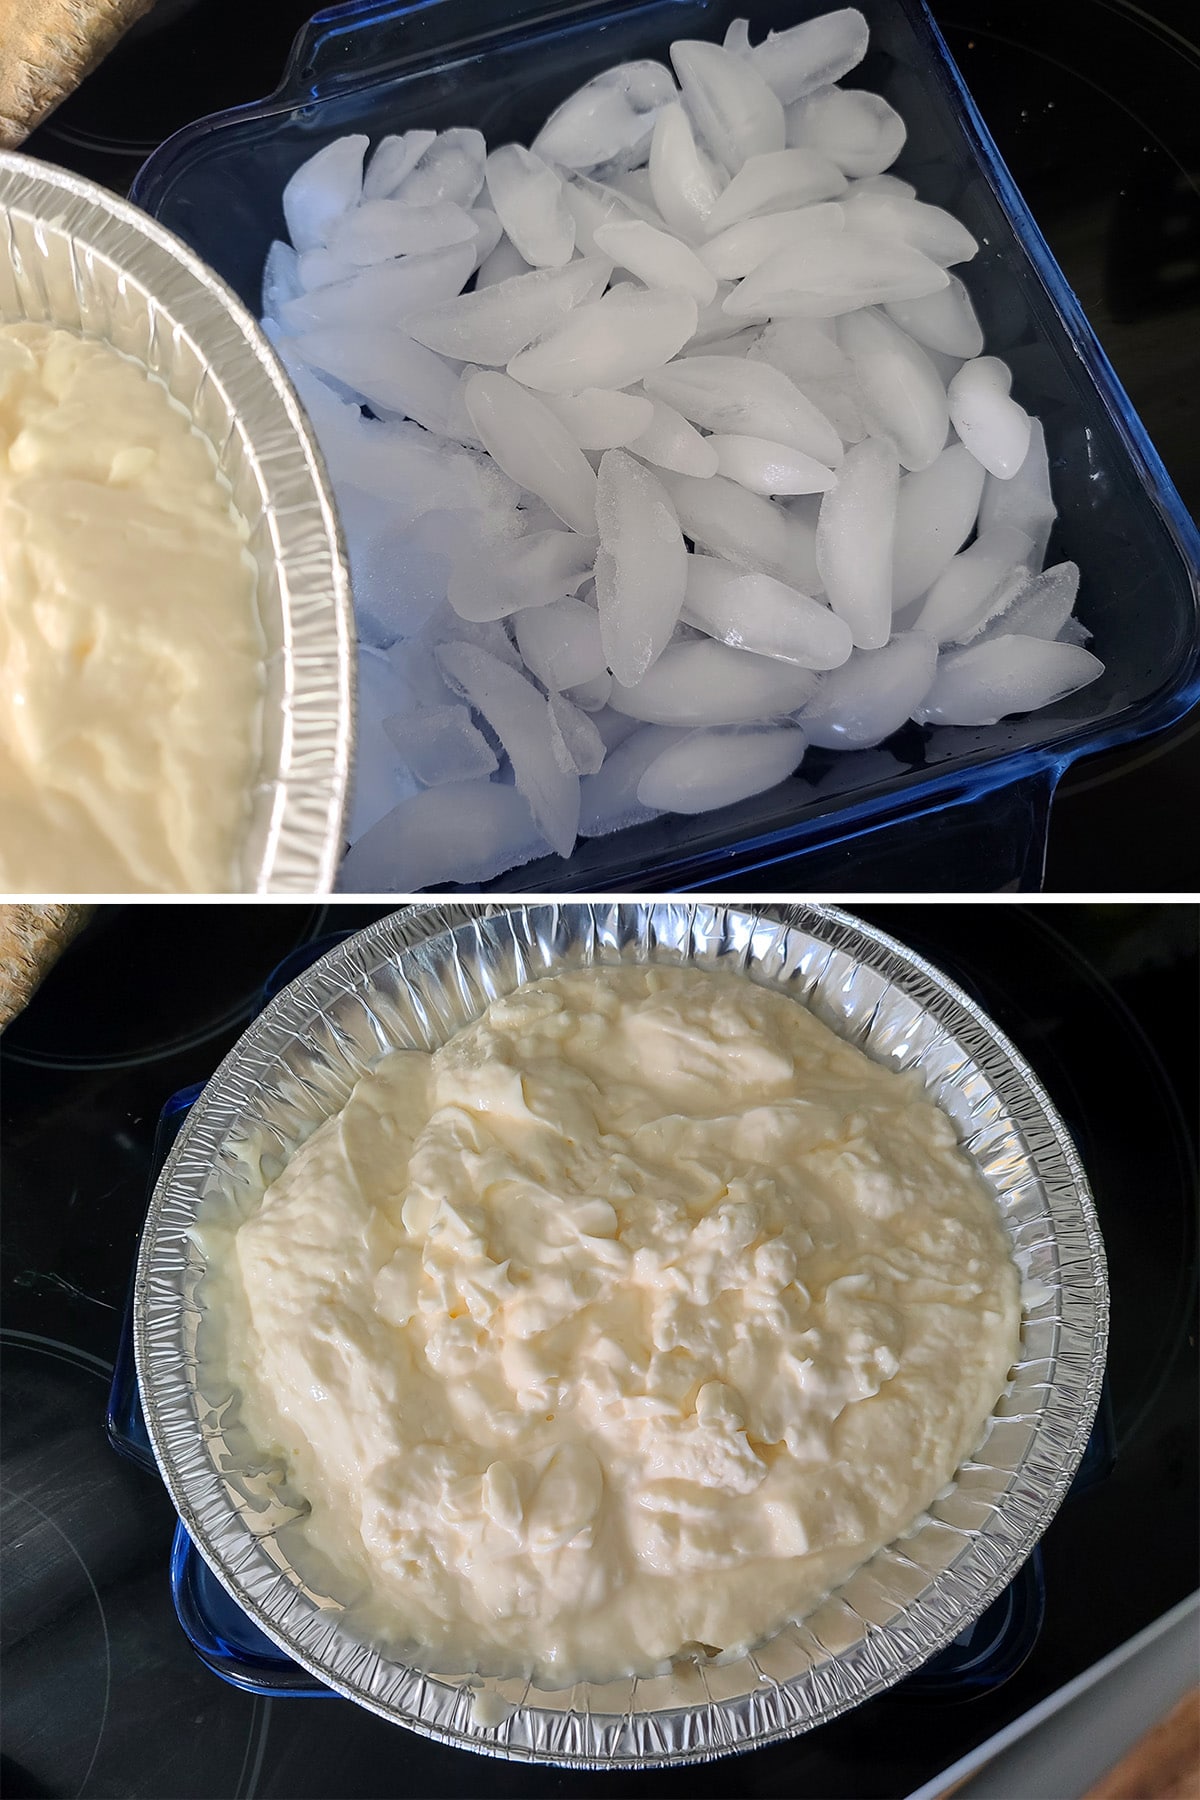 A pie pan of mayonnaise being placed on a pan of ice cubes.